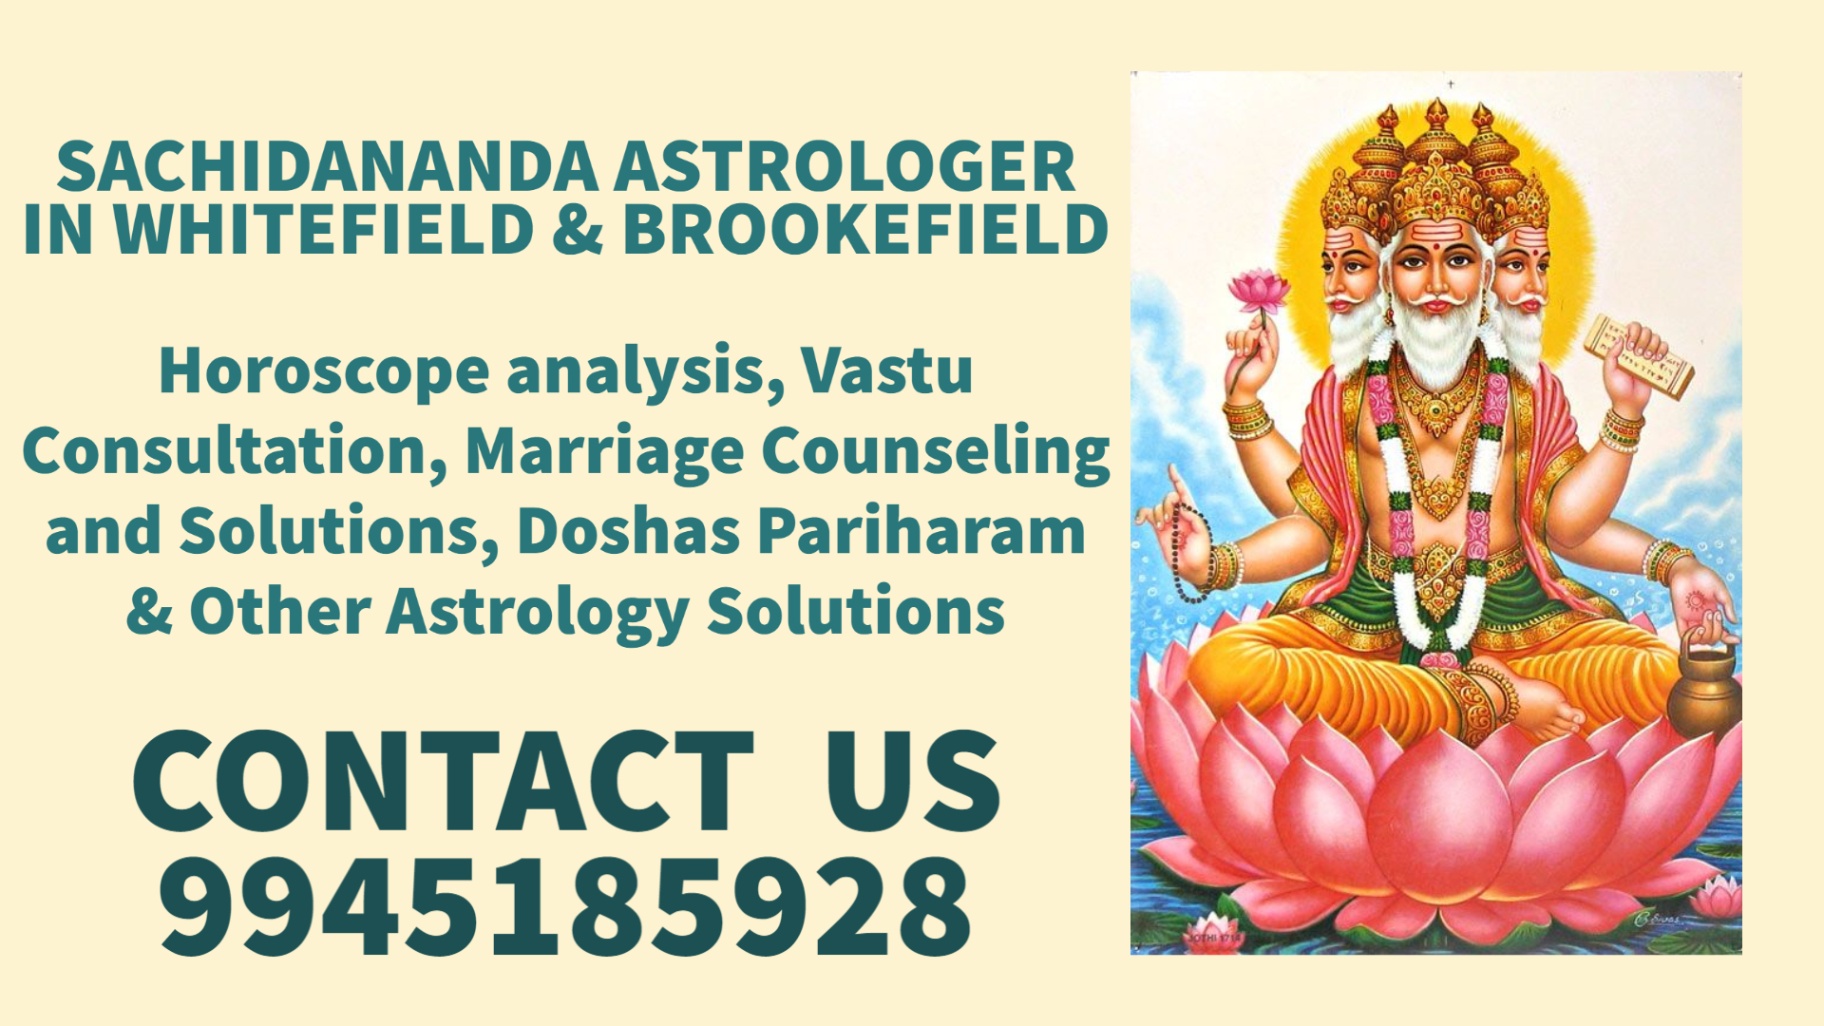 Astrologer, Numerologist, Vaastu Consultants, Horoscope creation; Exp: More than 15 year